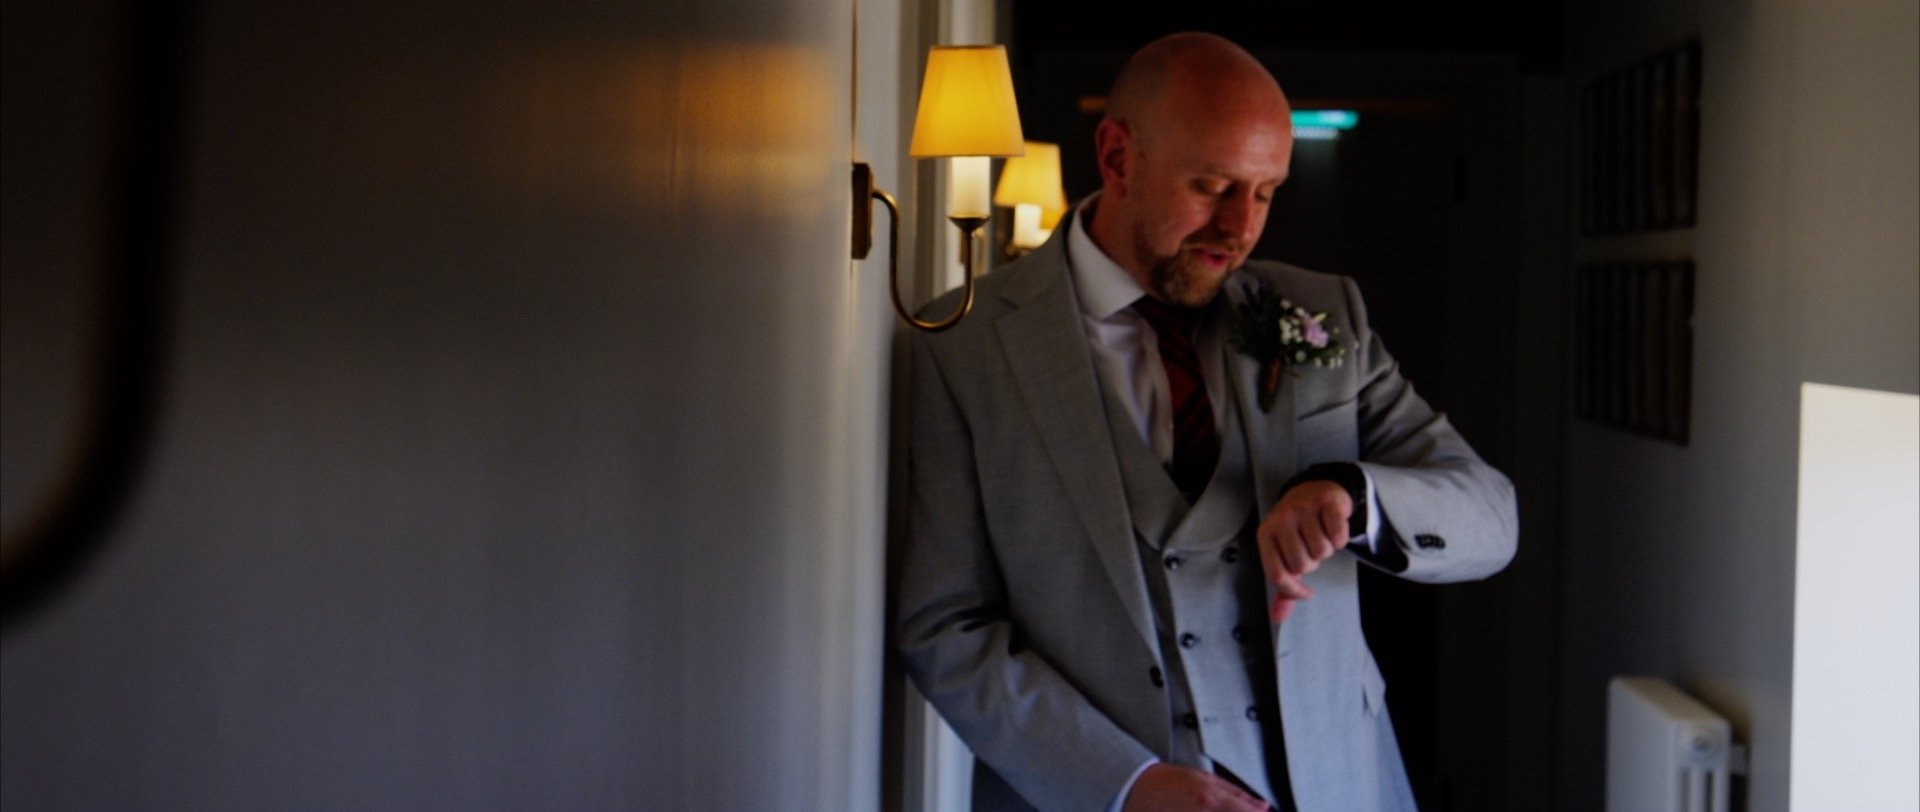 Everyting is on time at the wedding groom checking watch.jpg